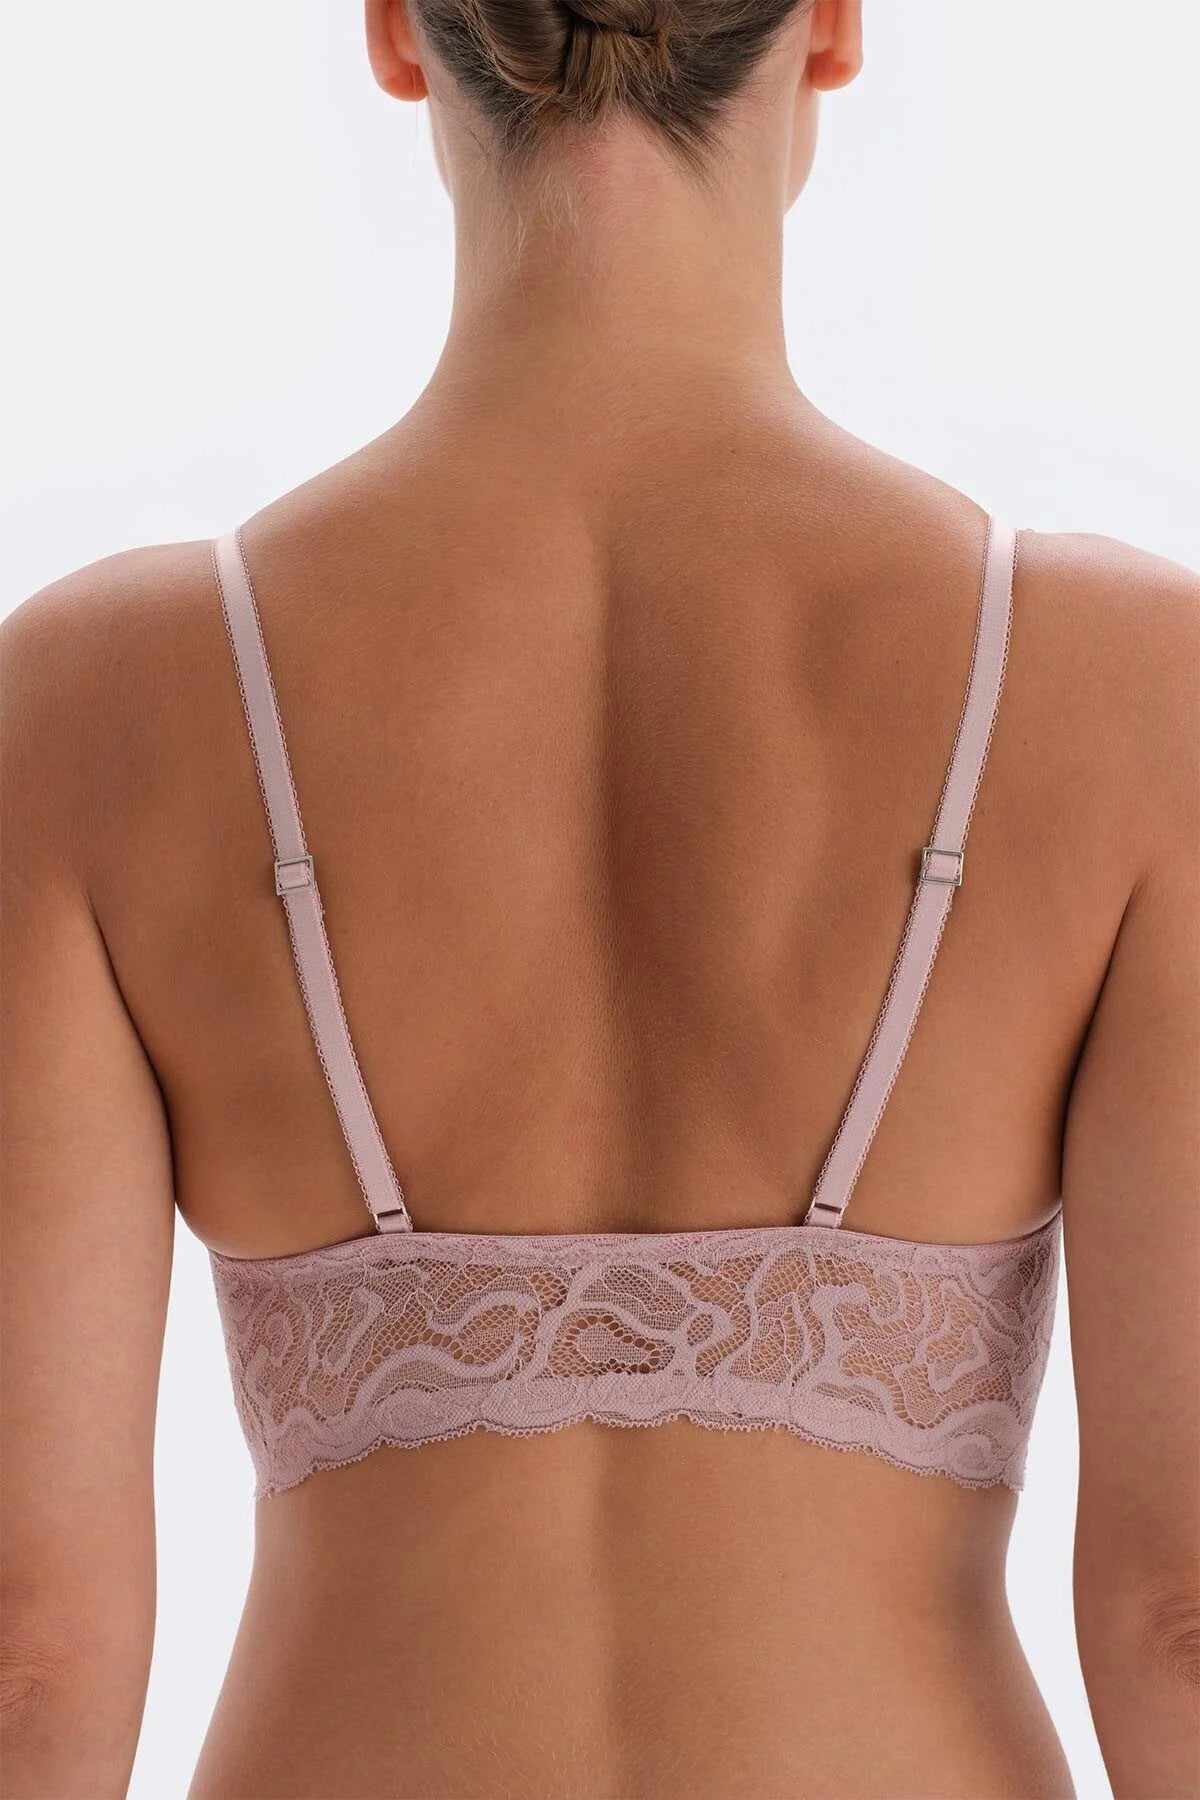 Soft Pink Lace and Tulle Detailed Underwire Bralette